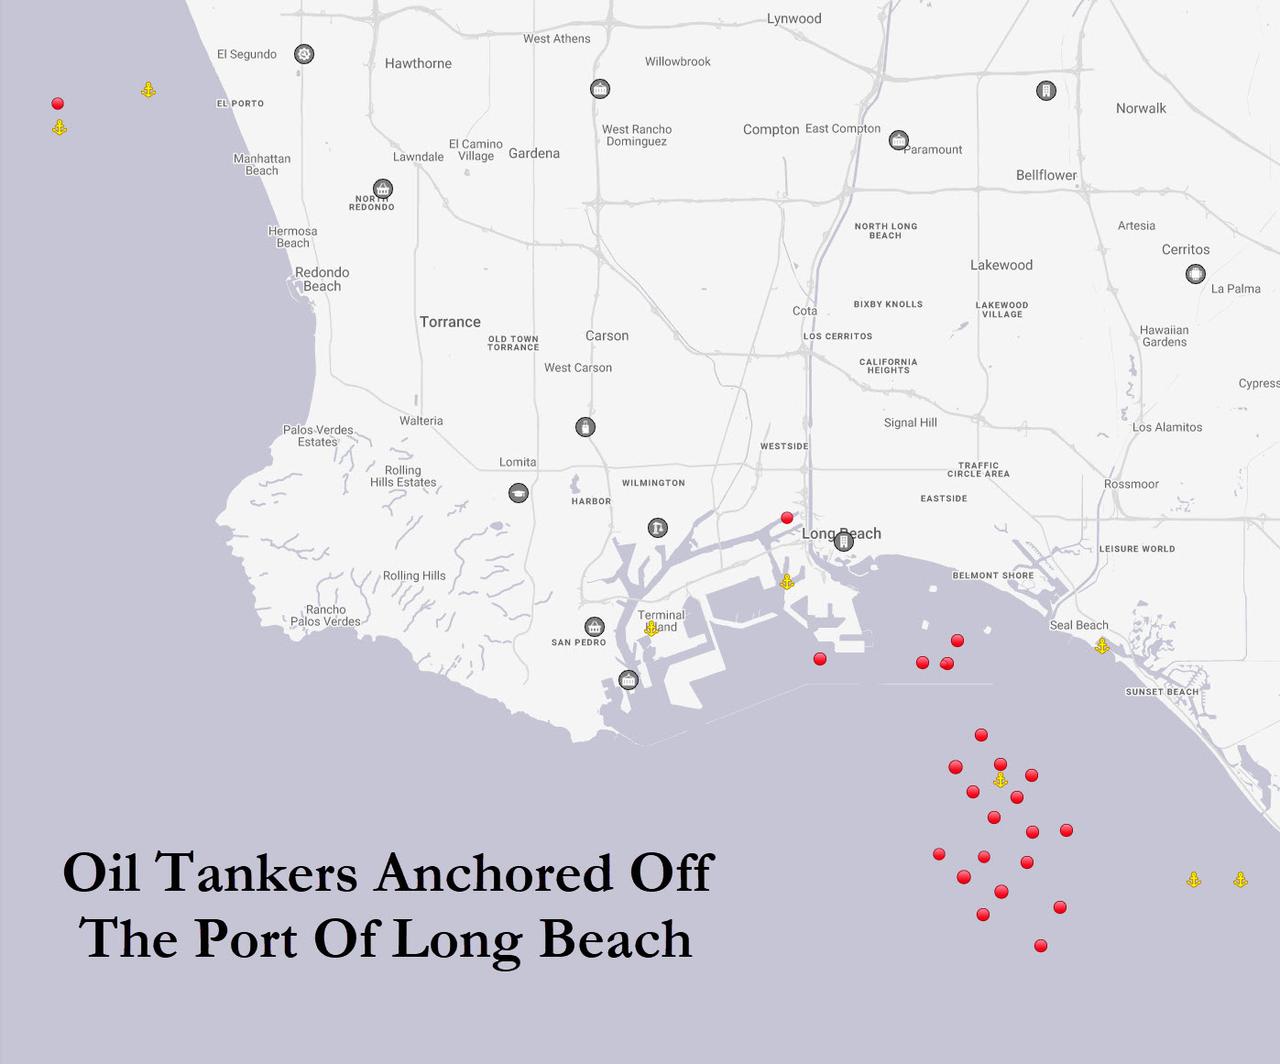 "We Are Moving Into The End-Game": 27 Tankers Anchored Off California, Hundreds Off Singapore As Oil Industry Shuts Down